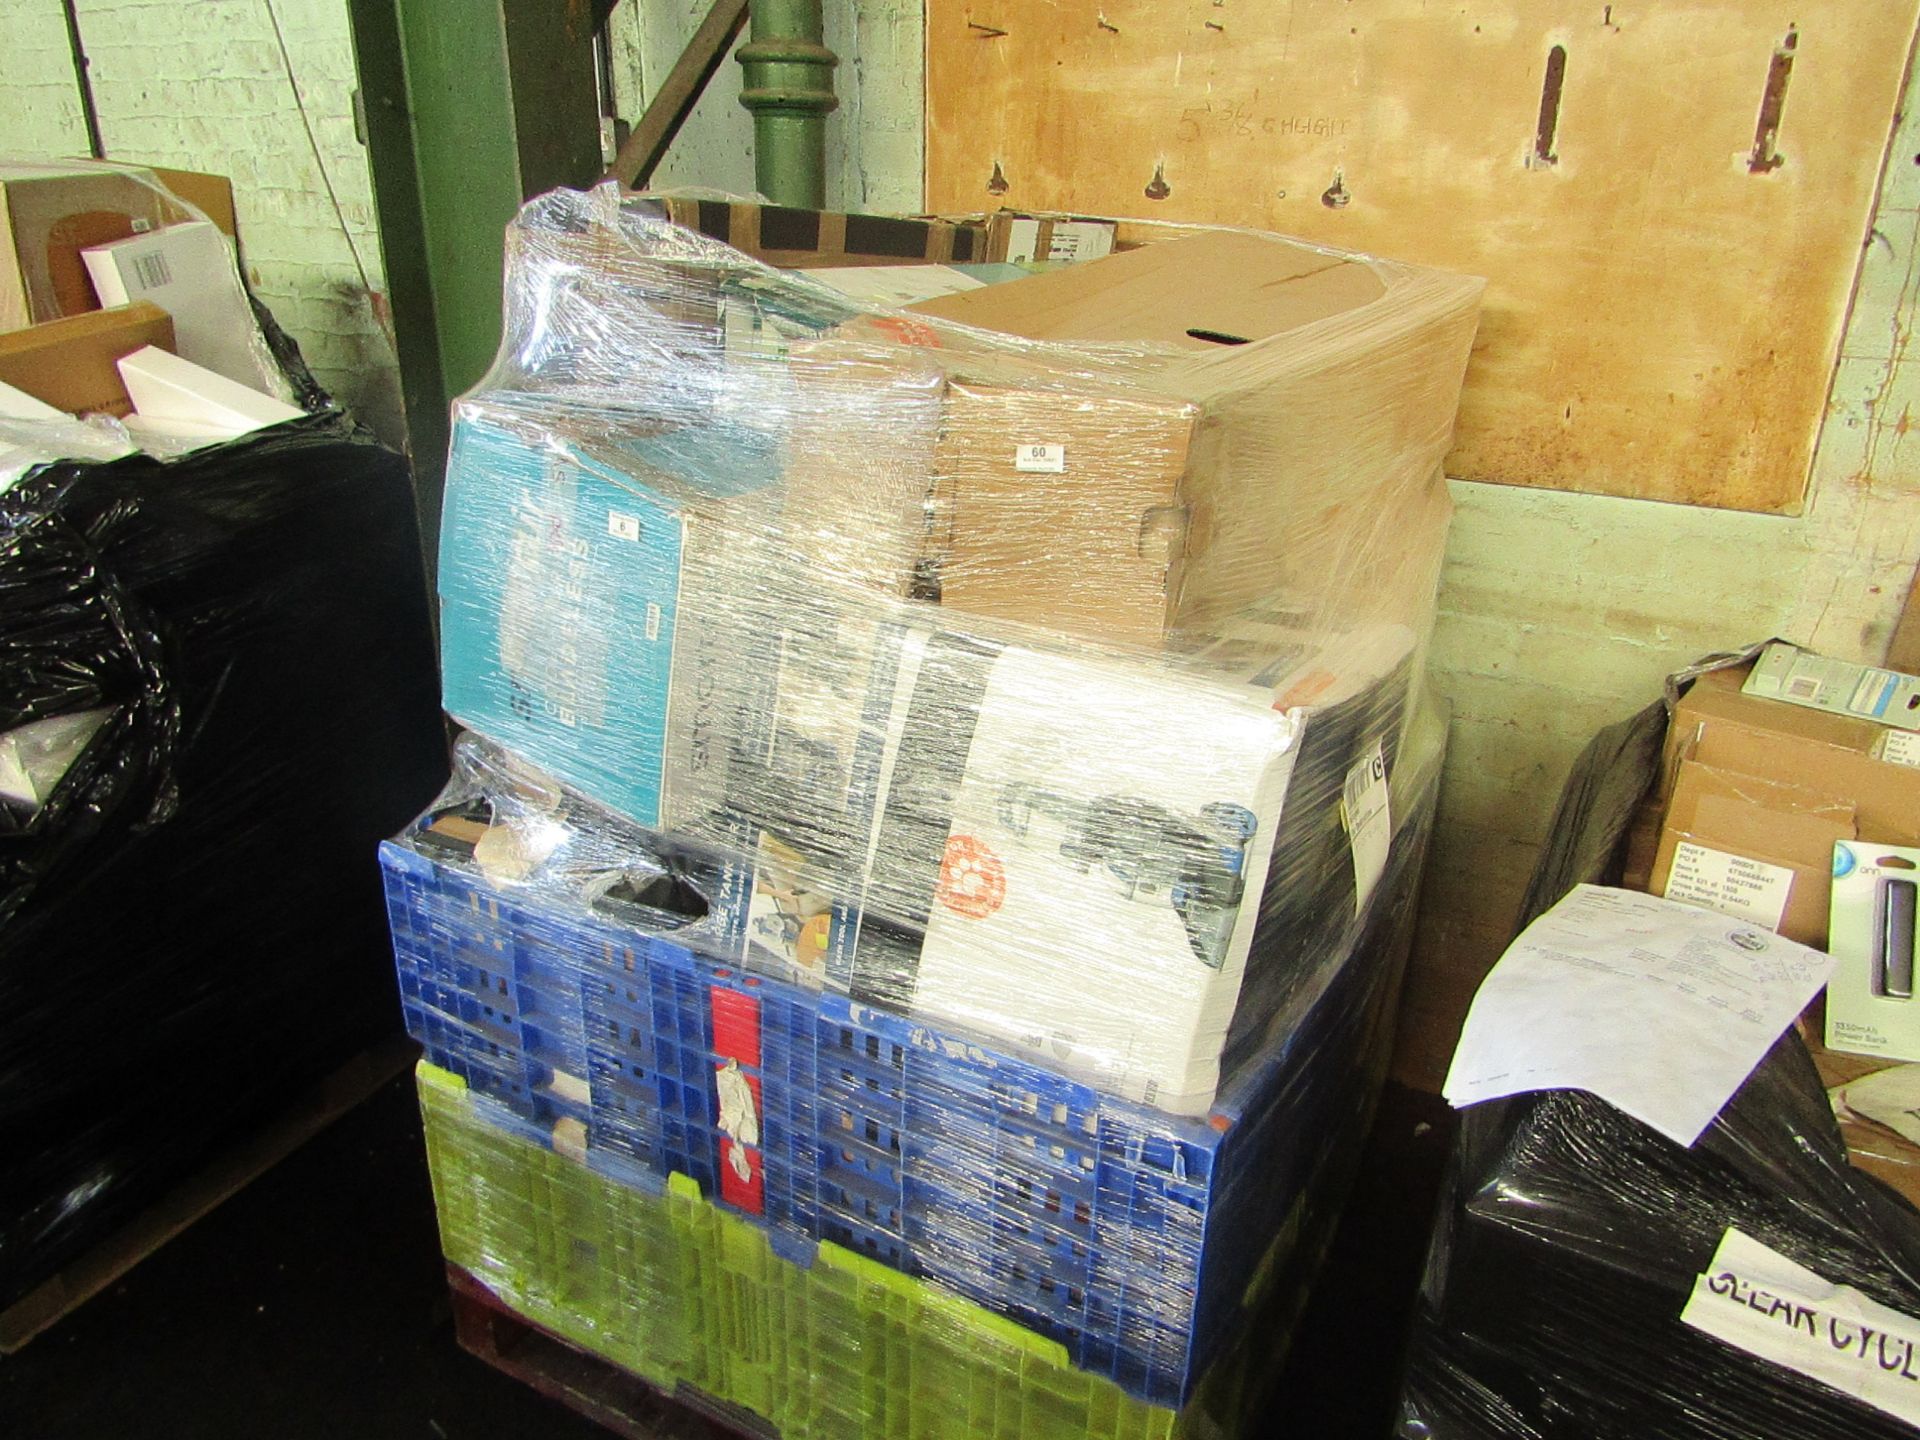 1X PALLET OF RAW CUSTOMER RETURN ELECTRICAL ITEMS FROM A LARGE ONLINE RETAILER | NO ONLINE